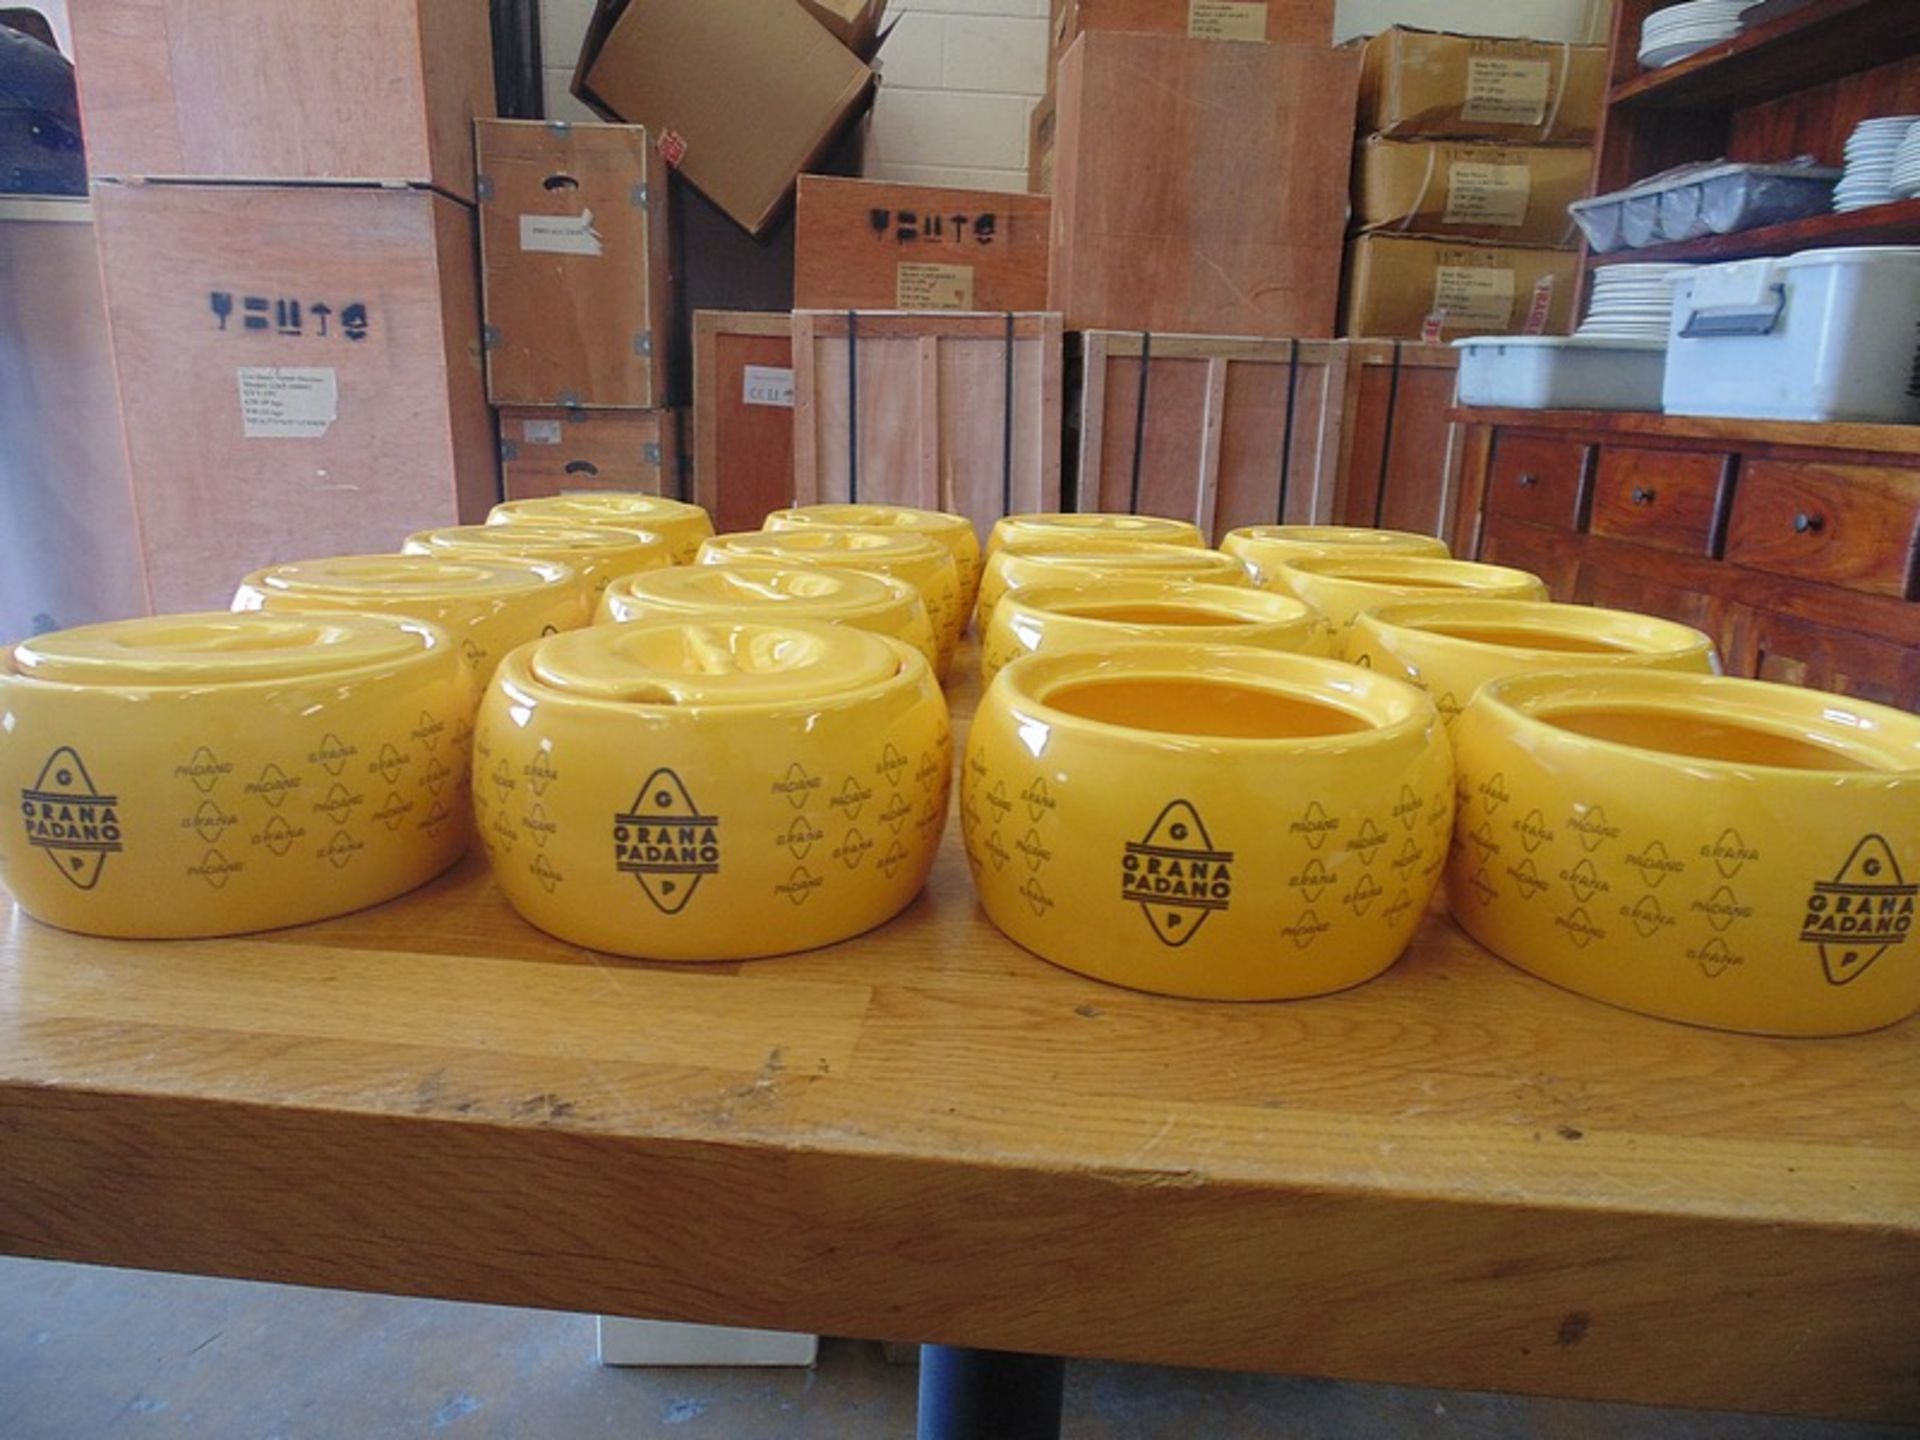 16 x Grana Padano yellow nut bowls - 110mm x 60mm 11 complete with lids